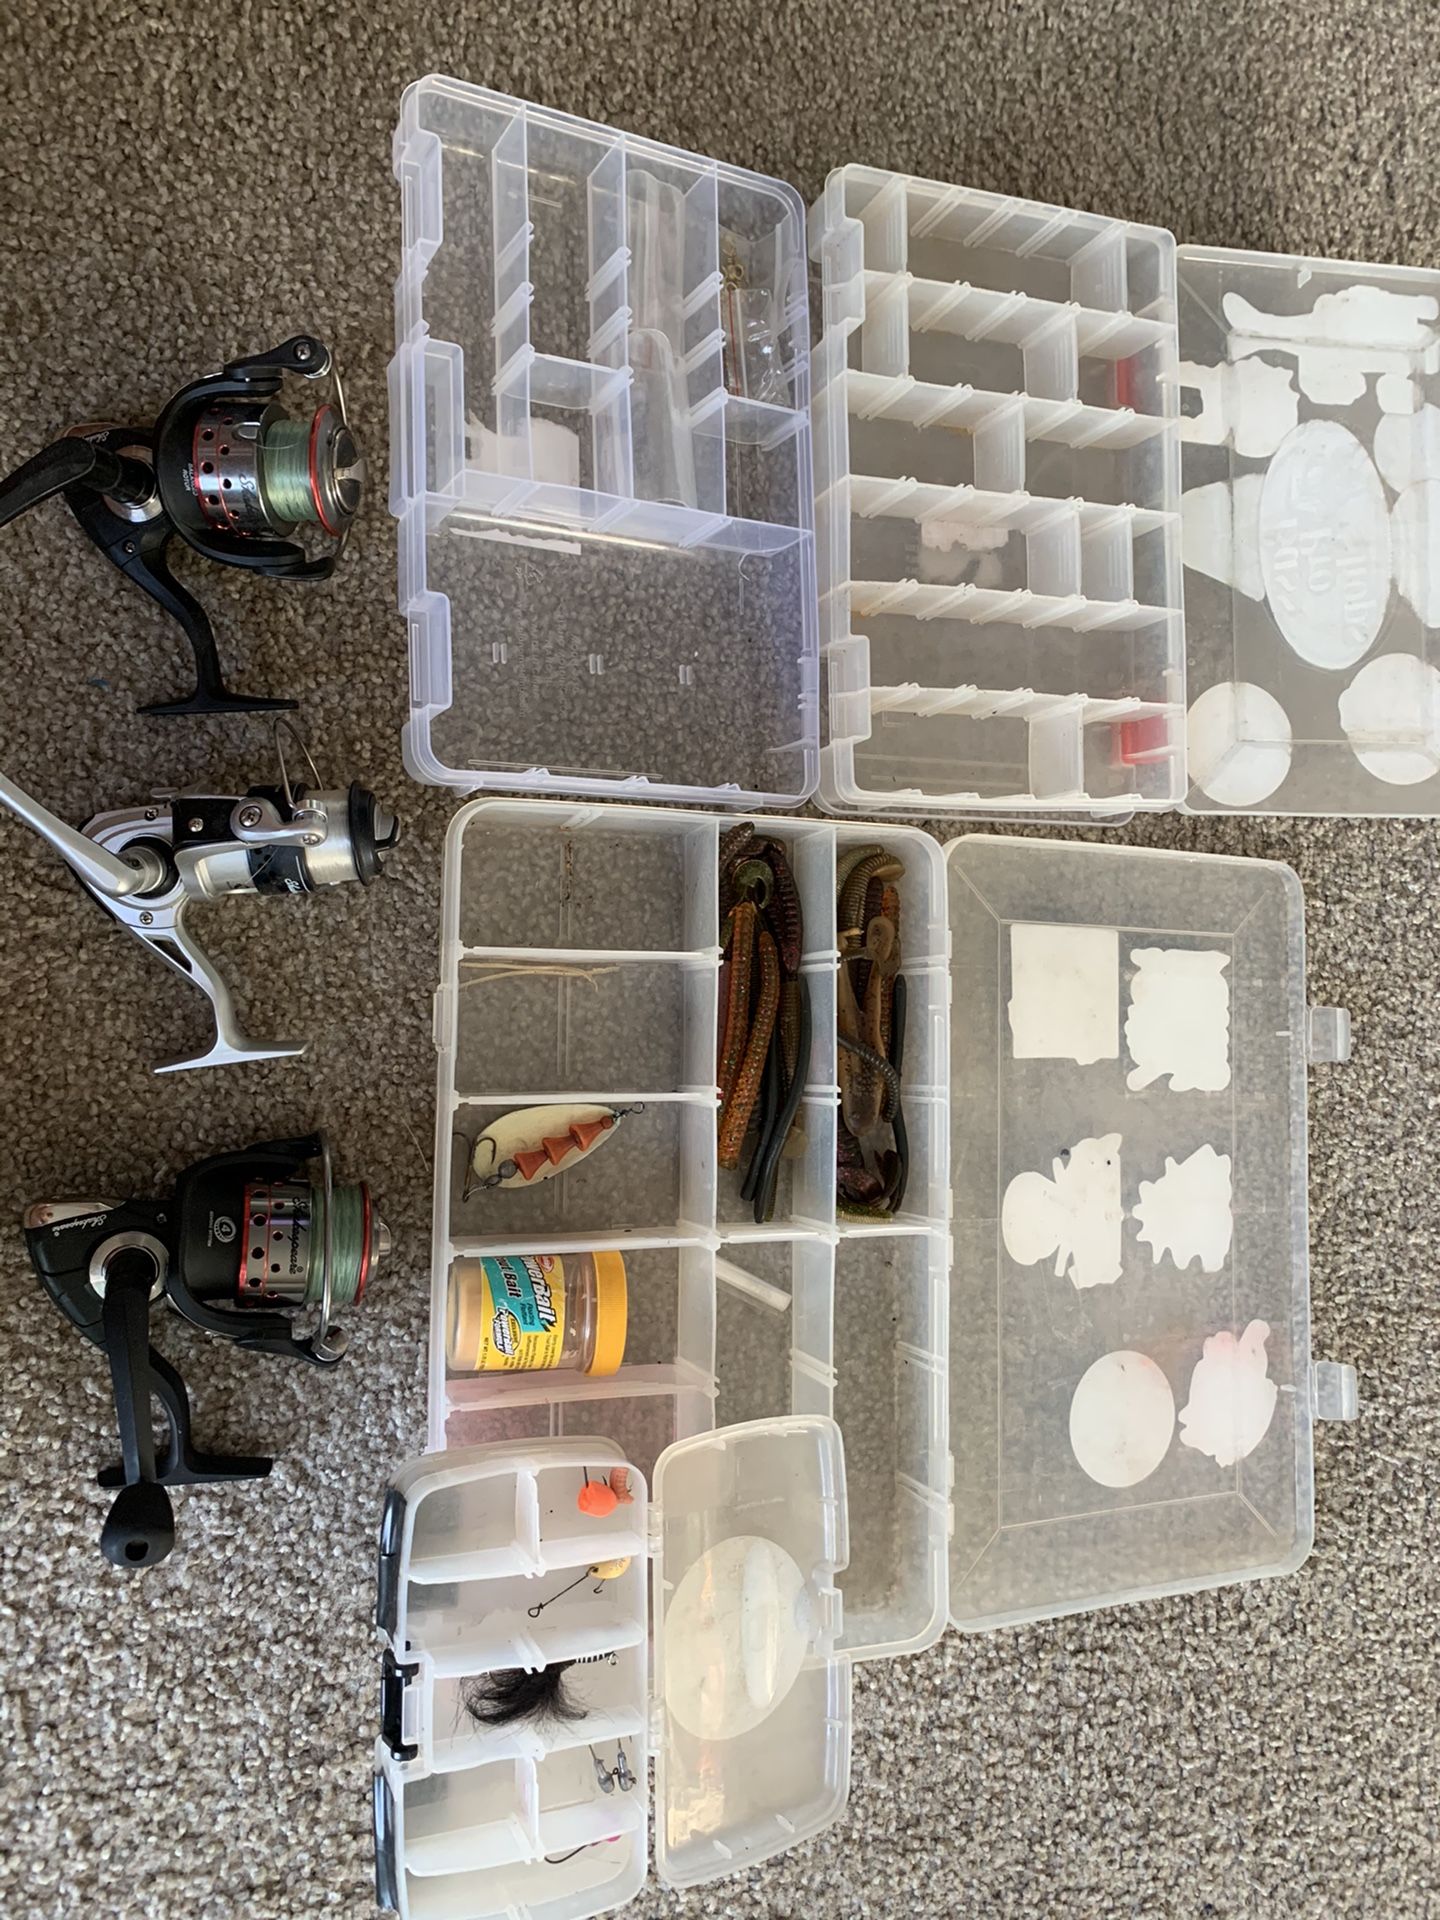 Miscellaneous fishing boxes and reels with some lures